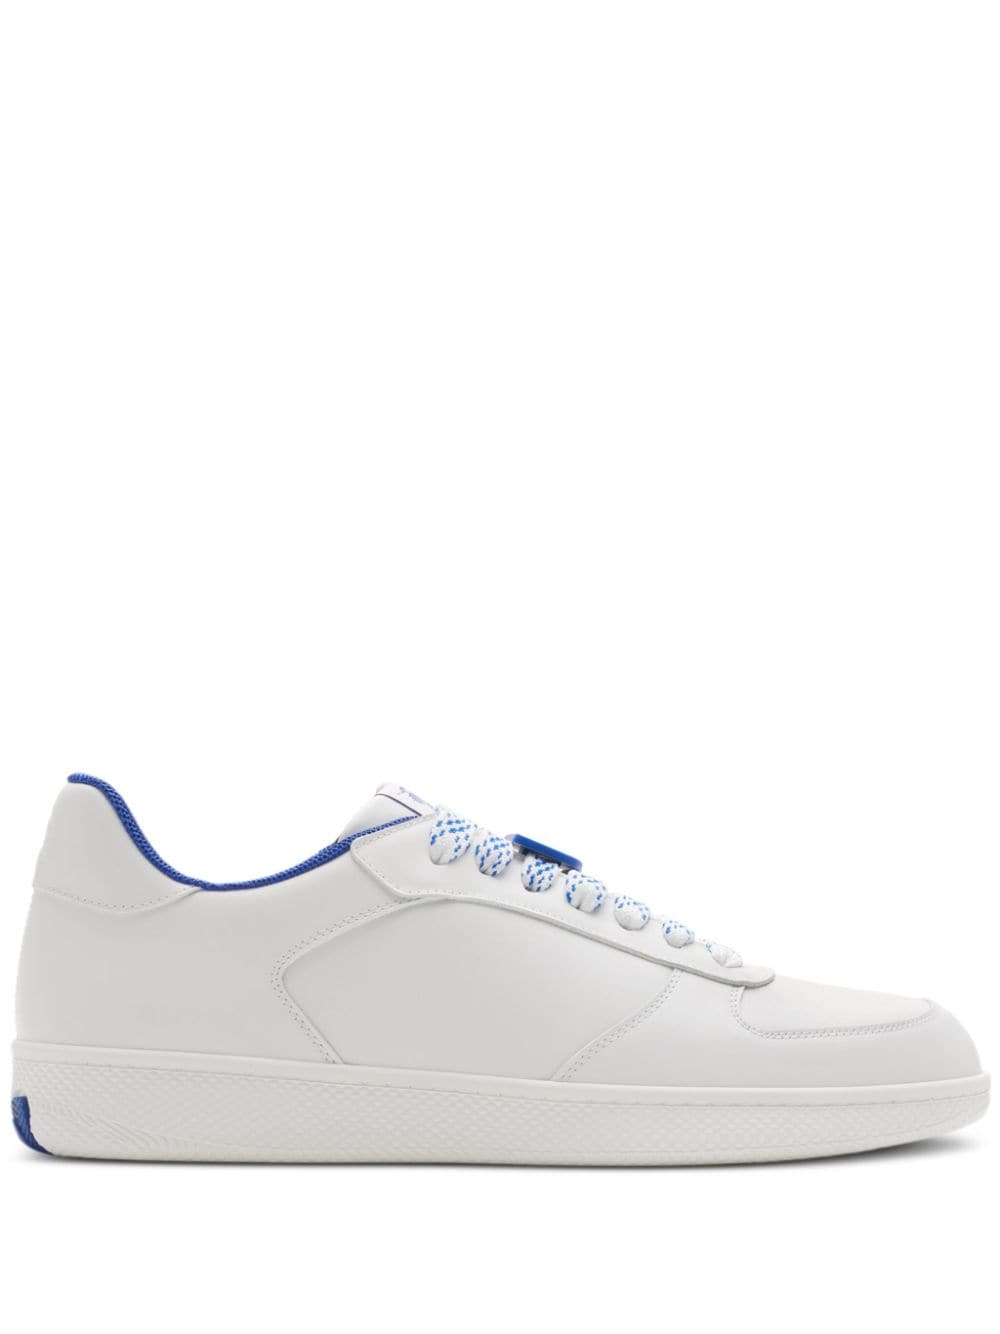 Burberry Terrace leather sneakers White